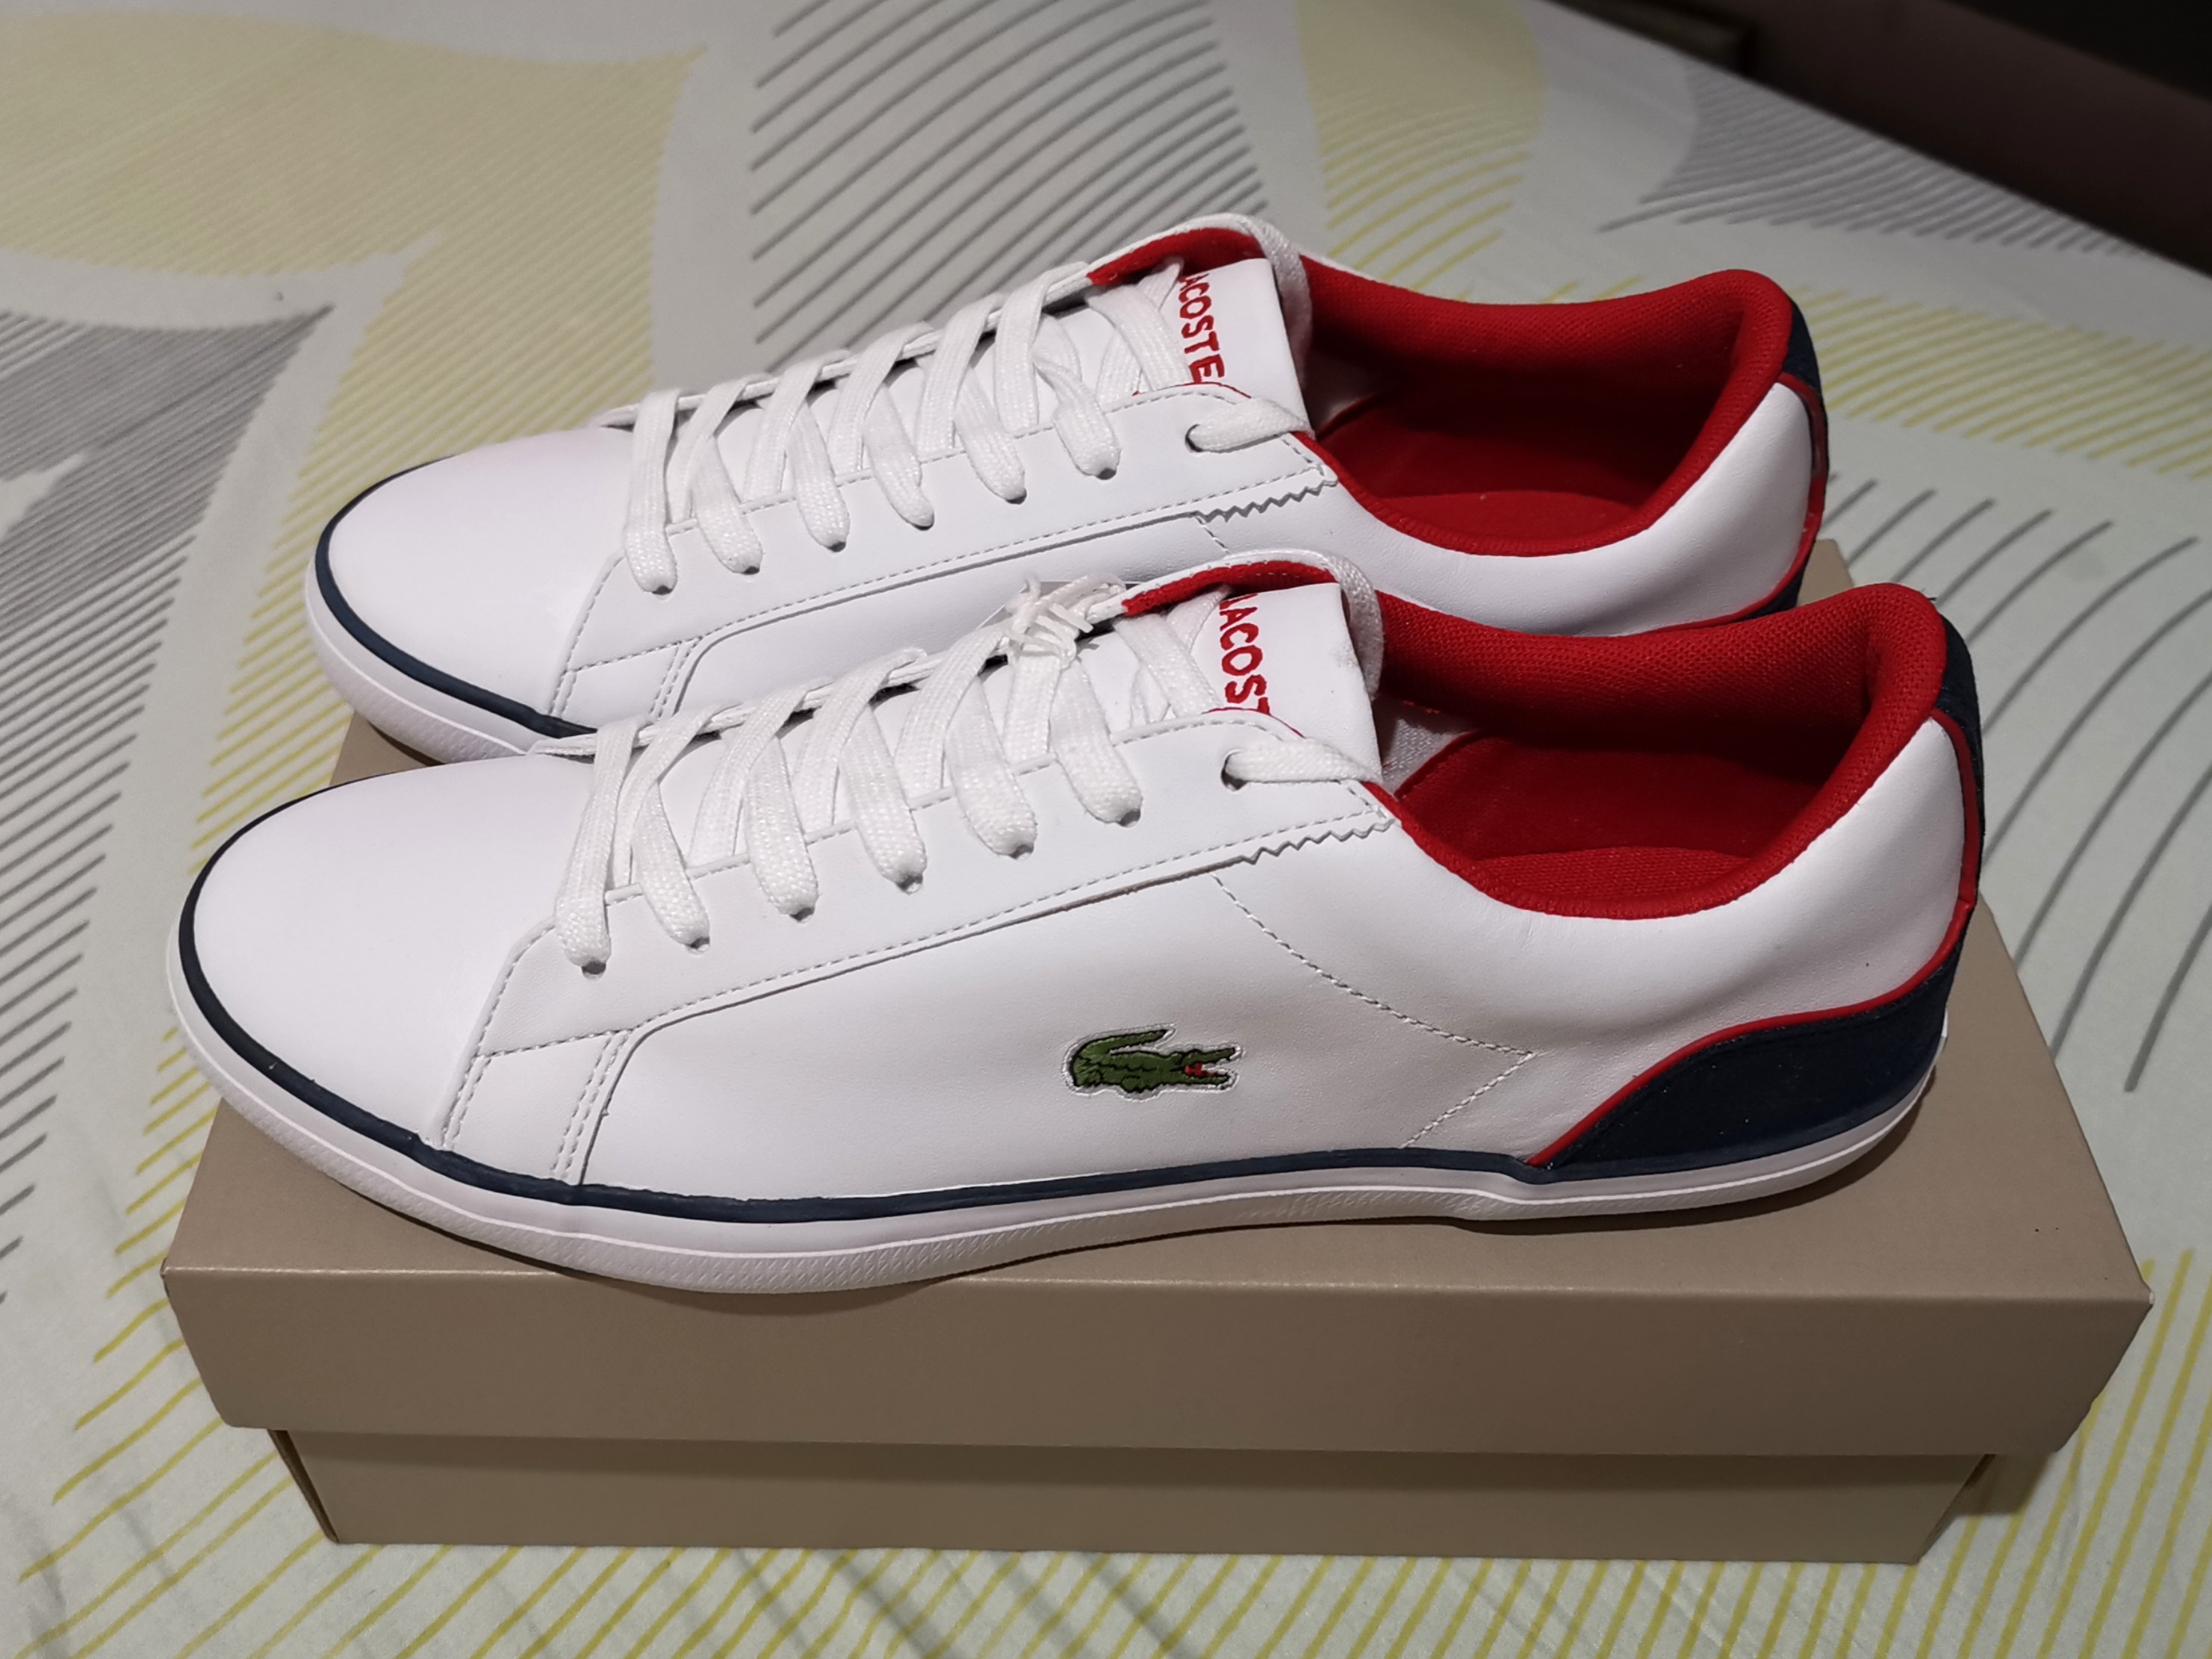 lacoste brand shoes